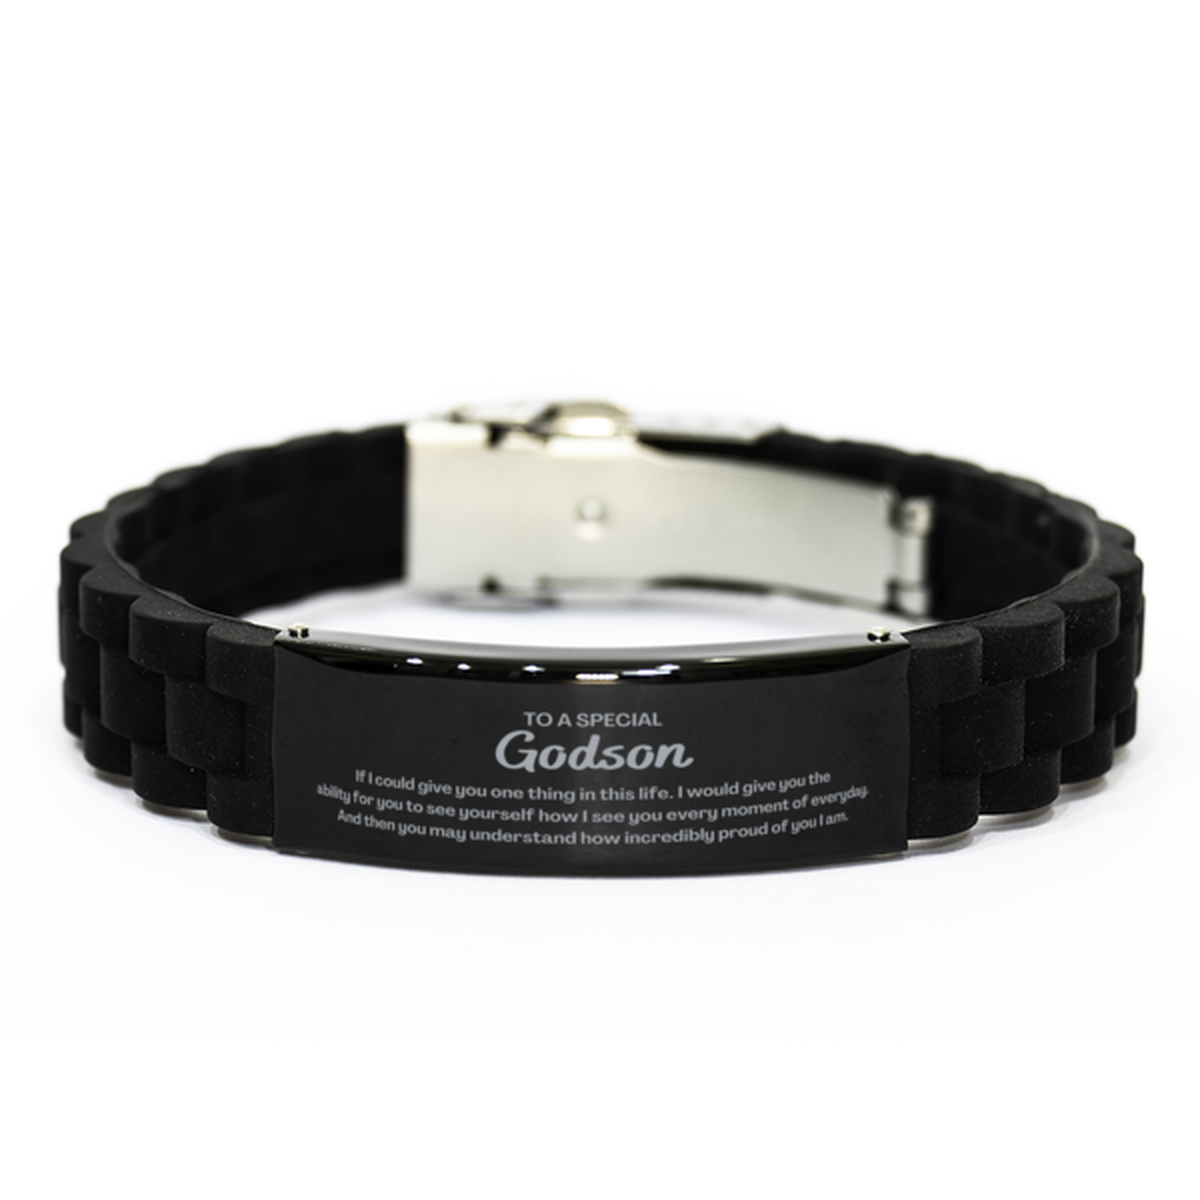 To My Godson Black Glidelock Clasp Bracelet, Gifts For Godson Engraved, Inspirational Gifts for Christmas Birthday, Epic Gifts for Godson To A Special Godson how incredibly proud of you I am